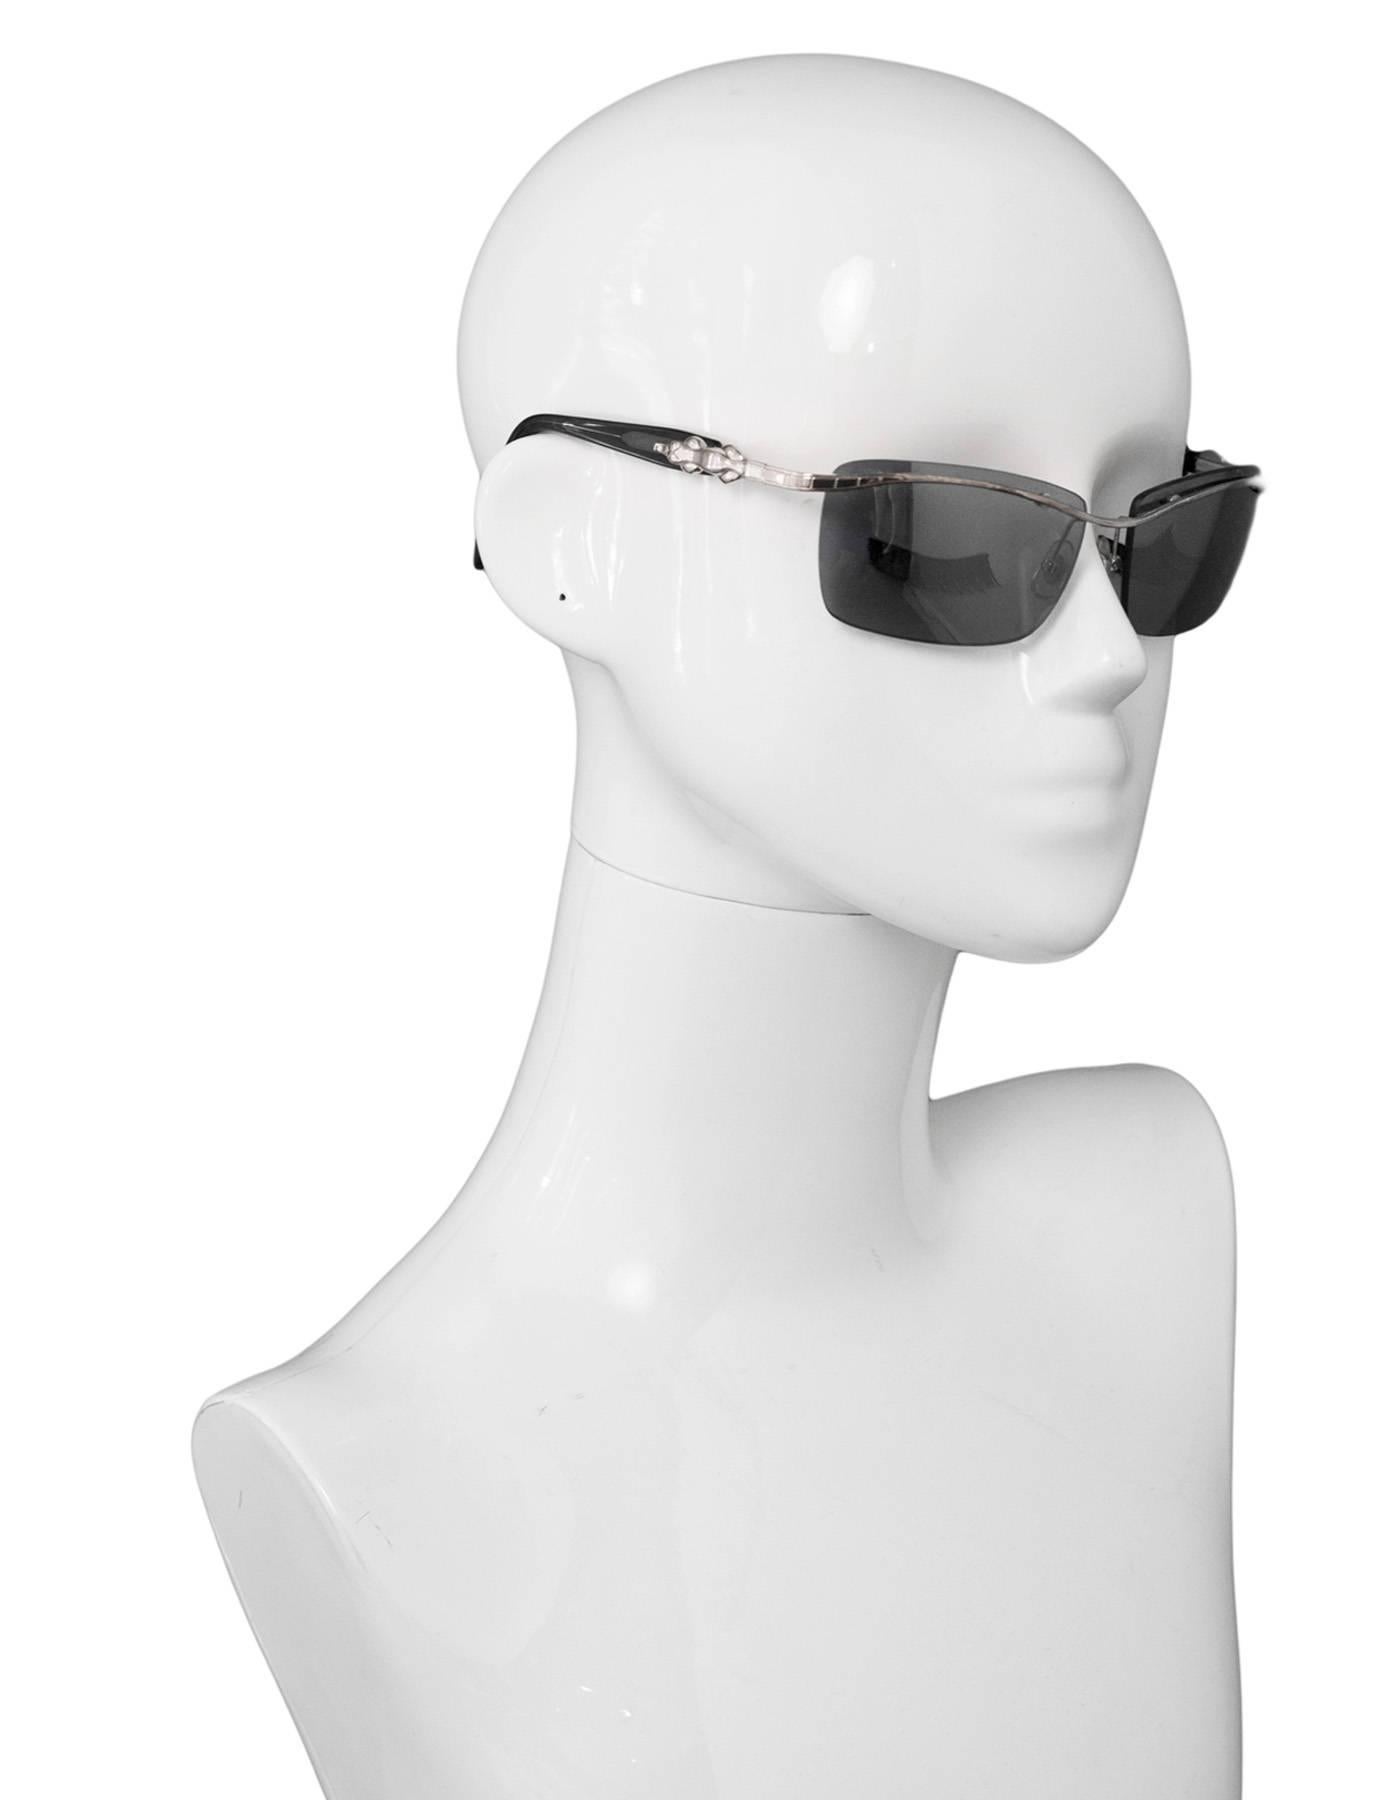 Kieselstein-Cord Black Super Star Mirrored Sunglasses

Made In: Japan
Color: Black, silver
Materials: Resin, metal
Overall Condition: Excellent pre-owned condition, light surface marks and slight tarnish
Included: Kieselstein-Cord